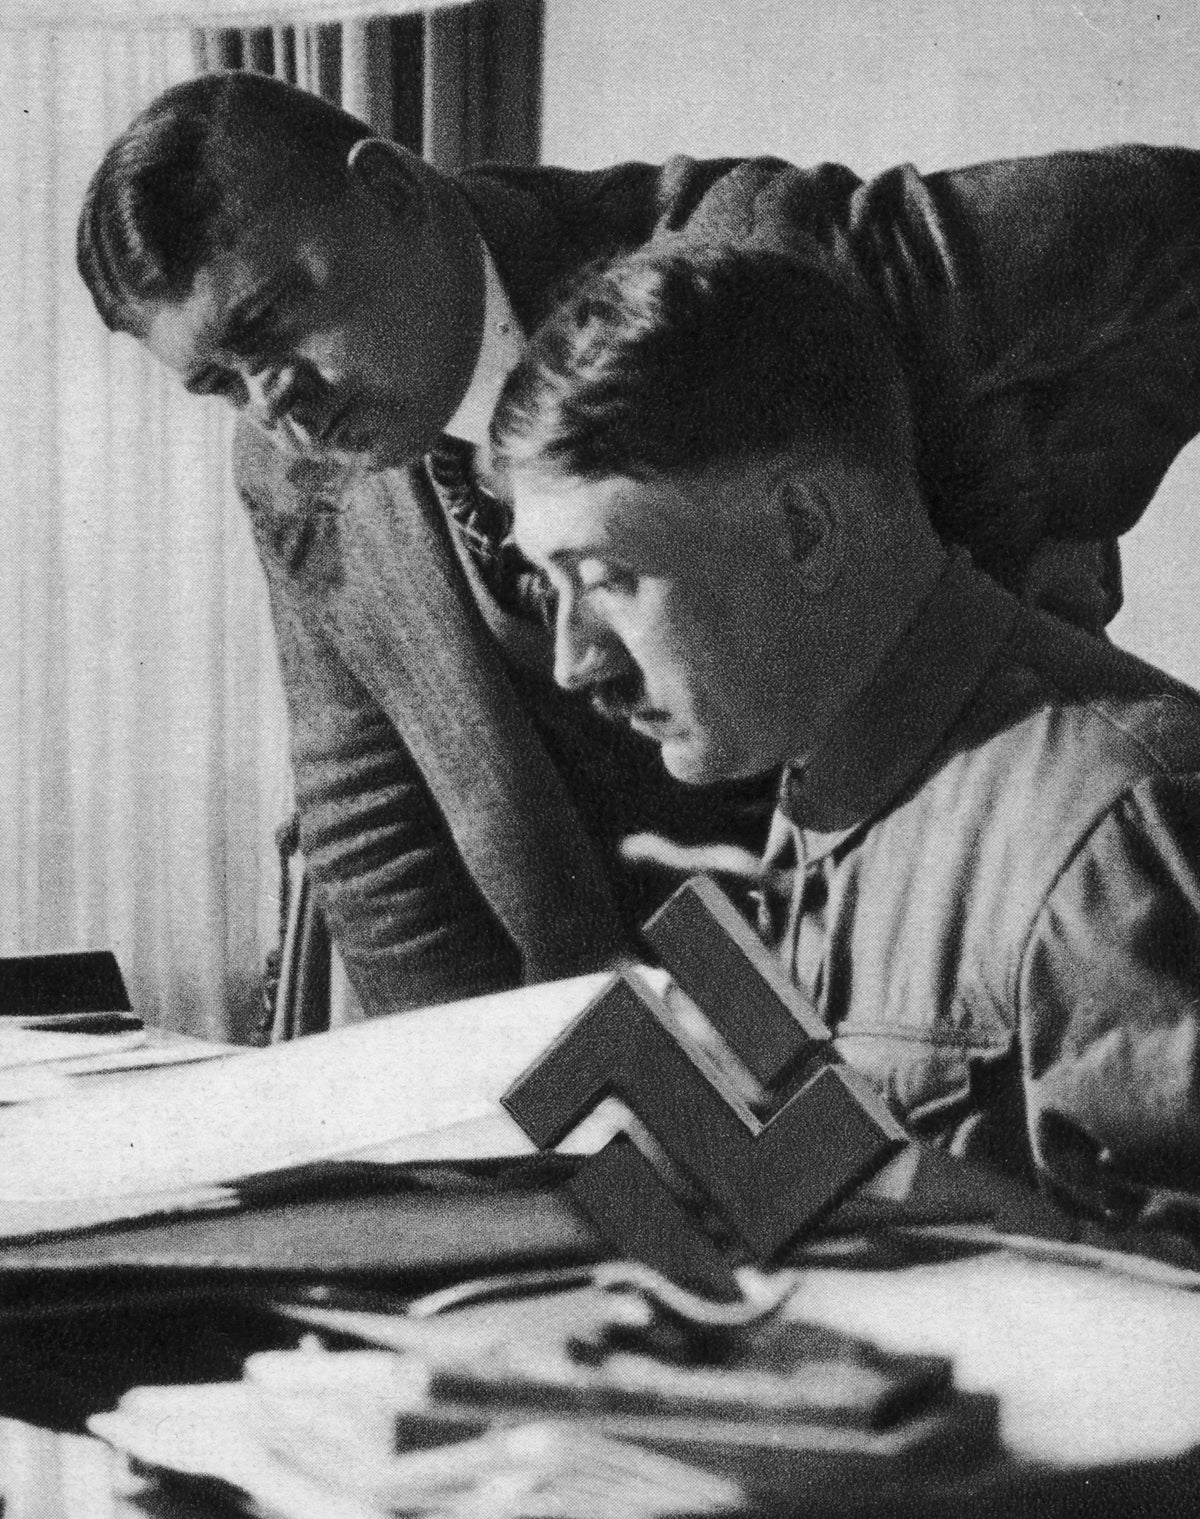 Hitler with SA chief of staff Ernst Roehm in 1933